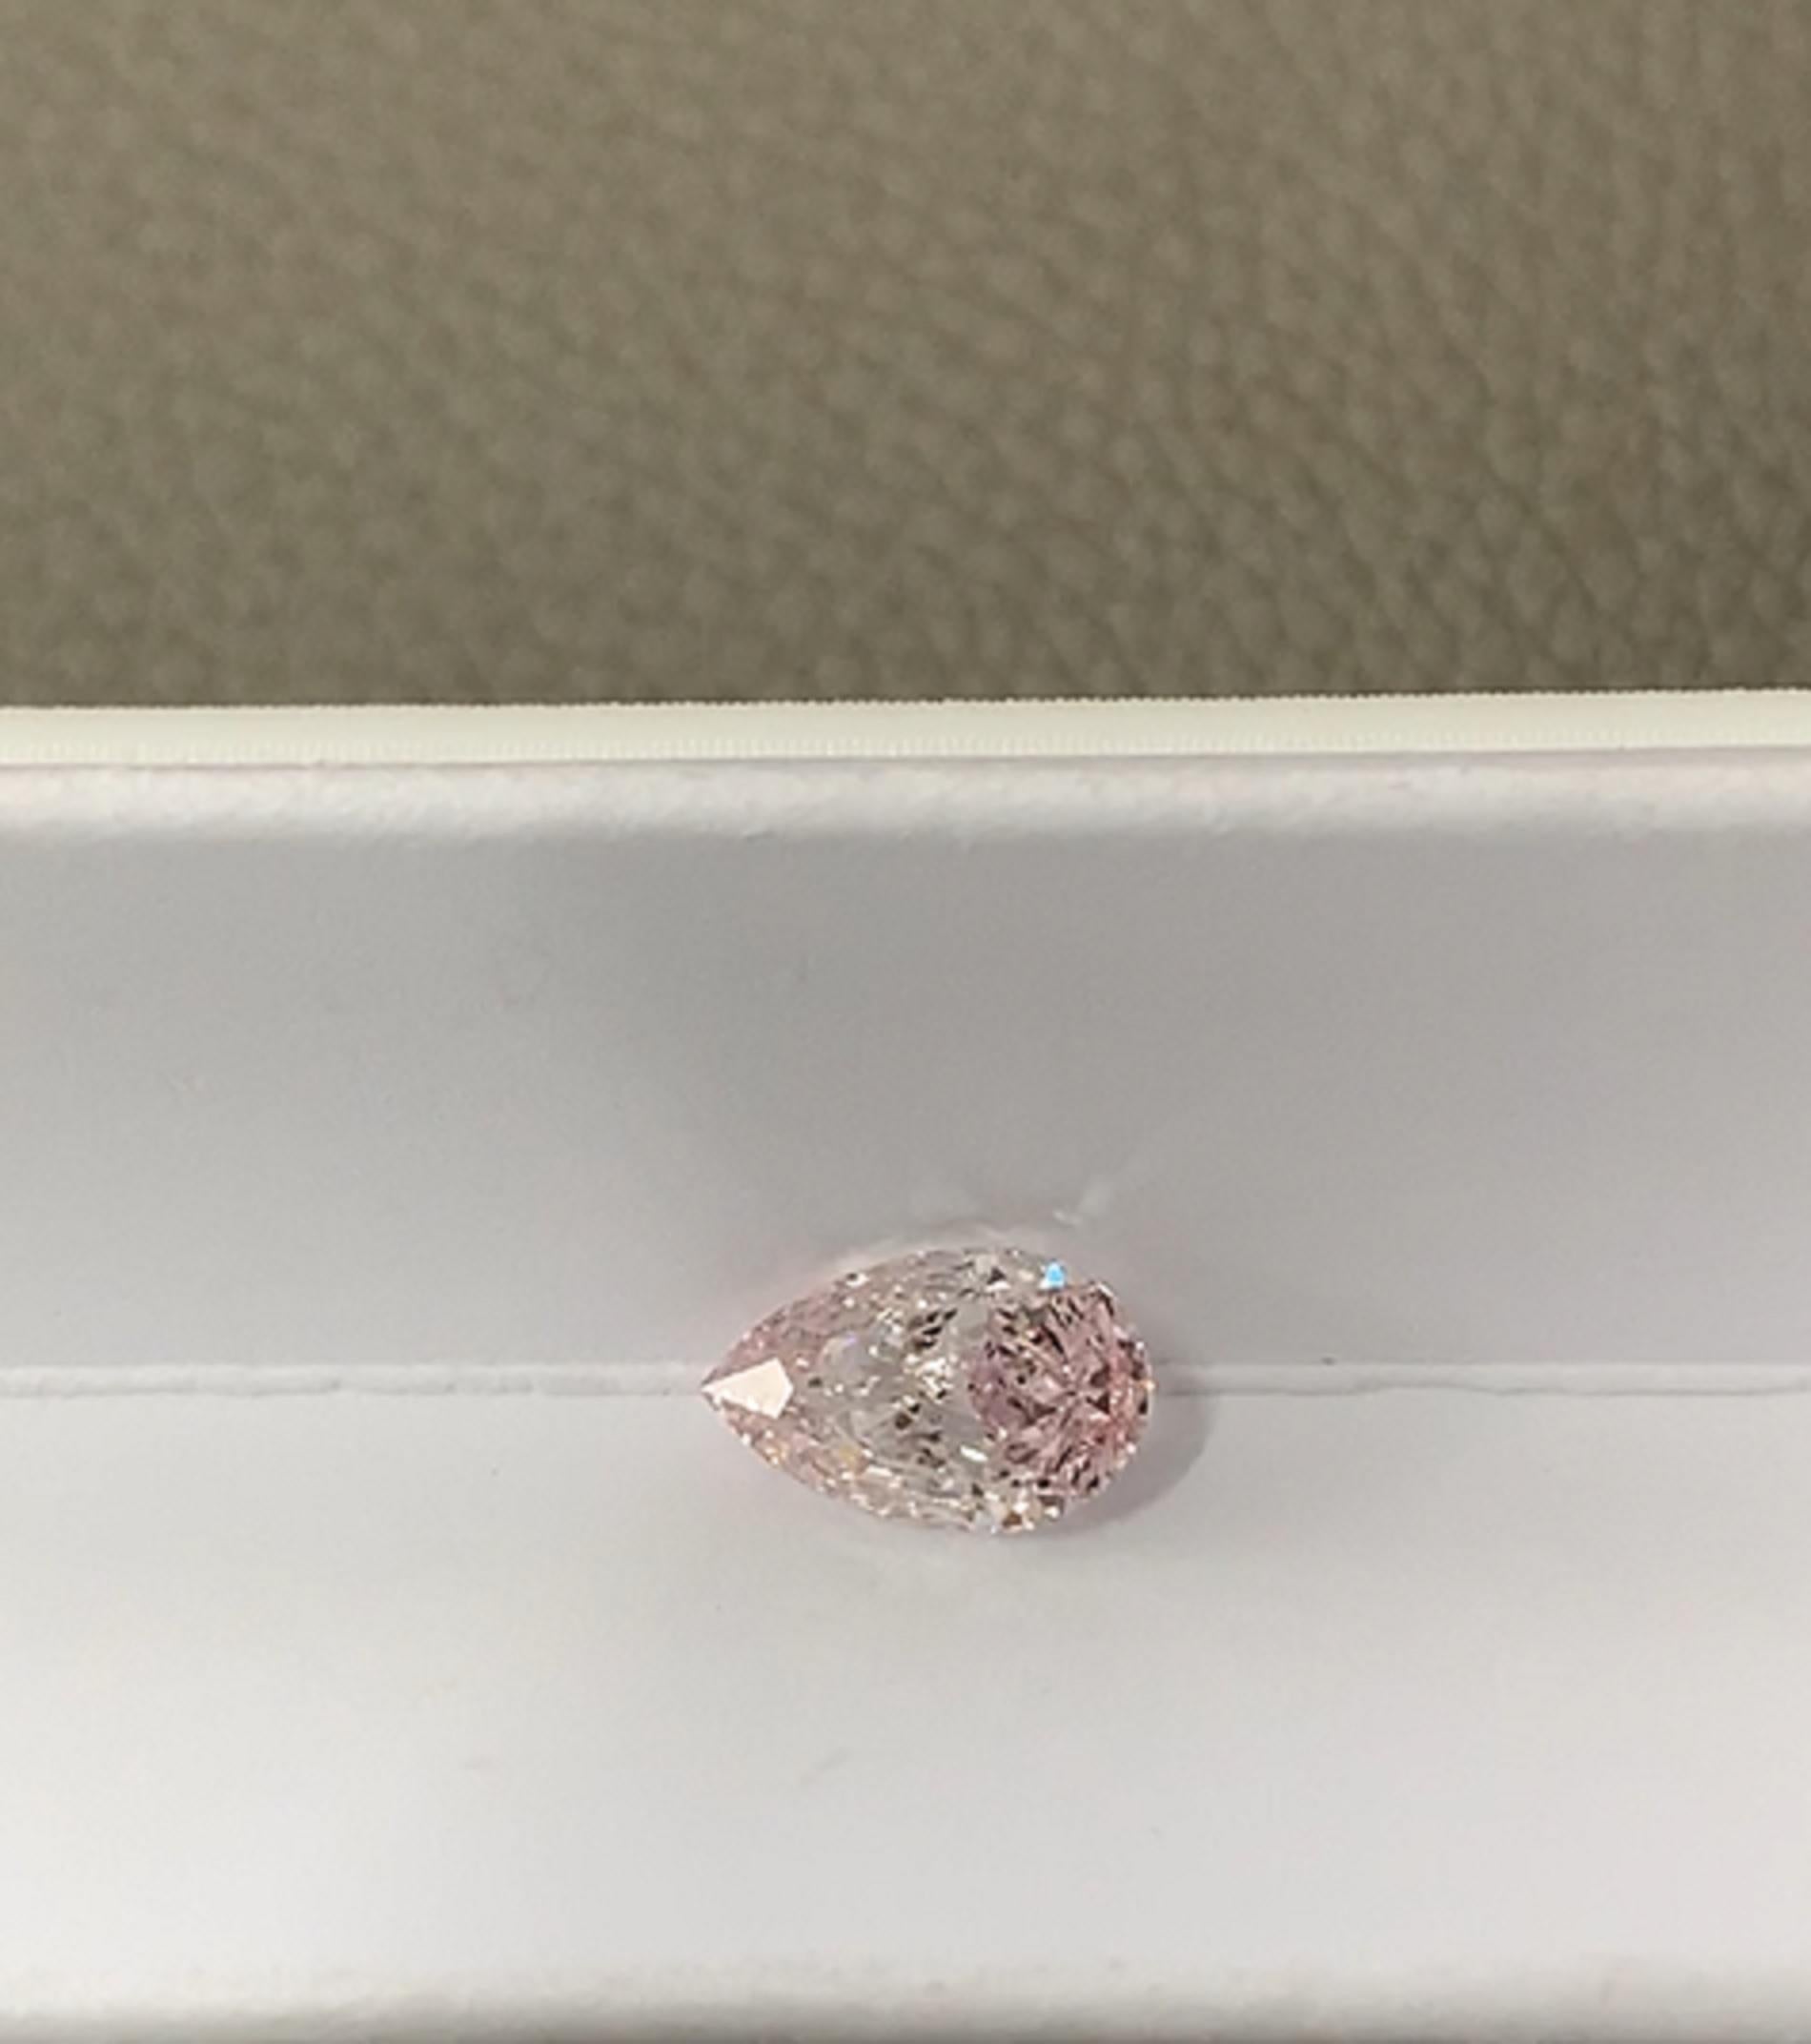 An exquisite GIA certified 4.98 carat 
fancy orangy pink
vs2 clarity

